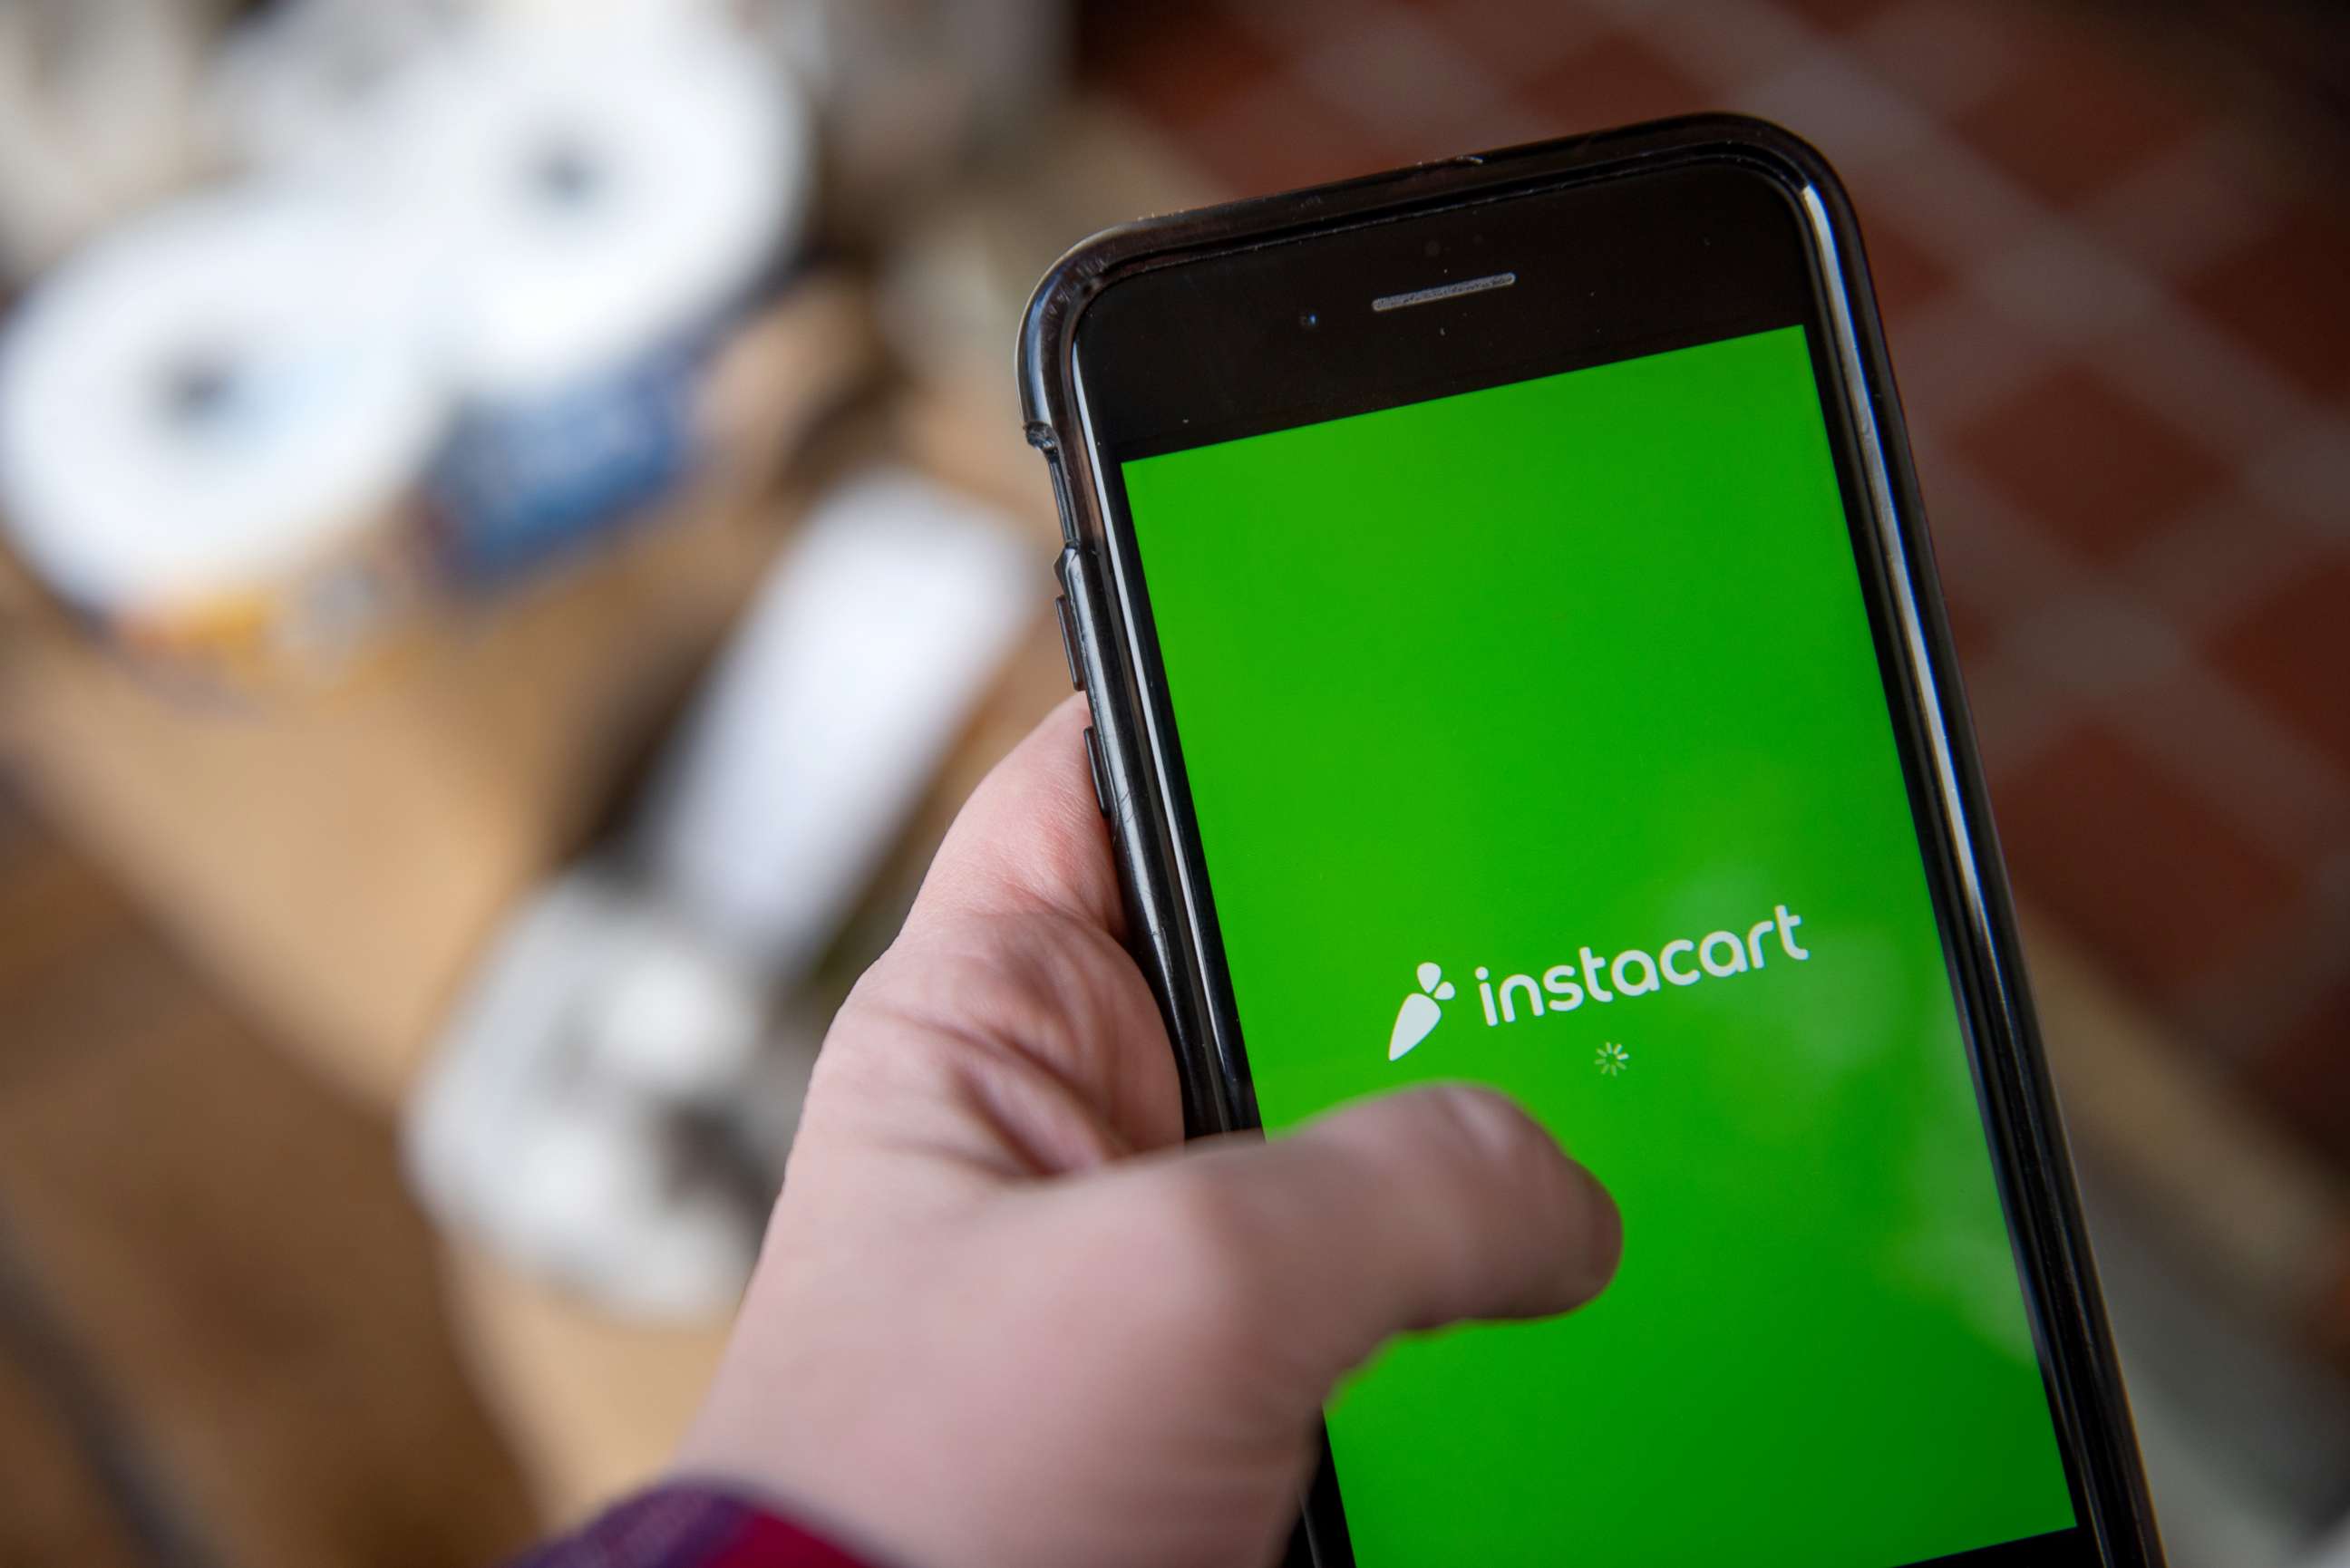 PHOTO: The Instacart logo on a smartphone in Hastings-on-Hudson, New York, Jan. 4, 2021.